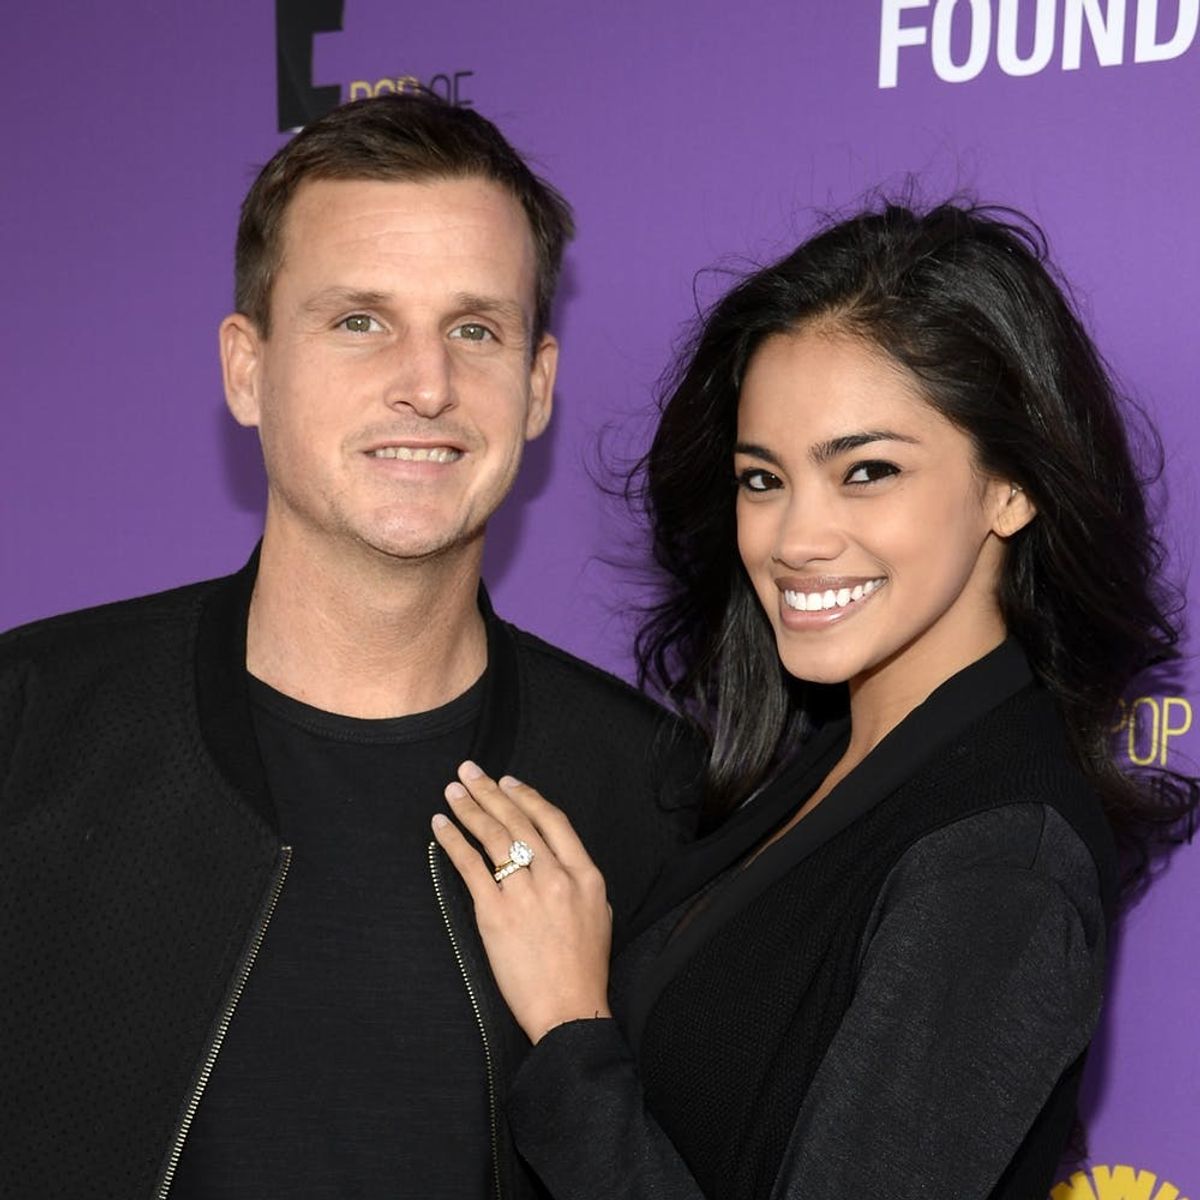 Rob Dyrdek Is a Daddy + This Is His Baby Boy’s Super Fun Name